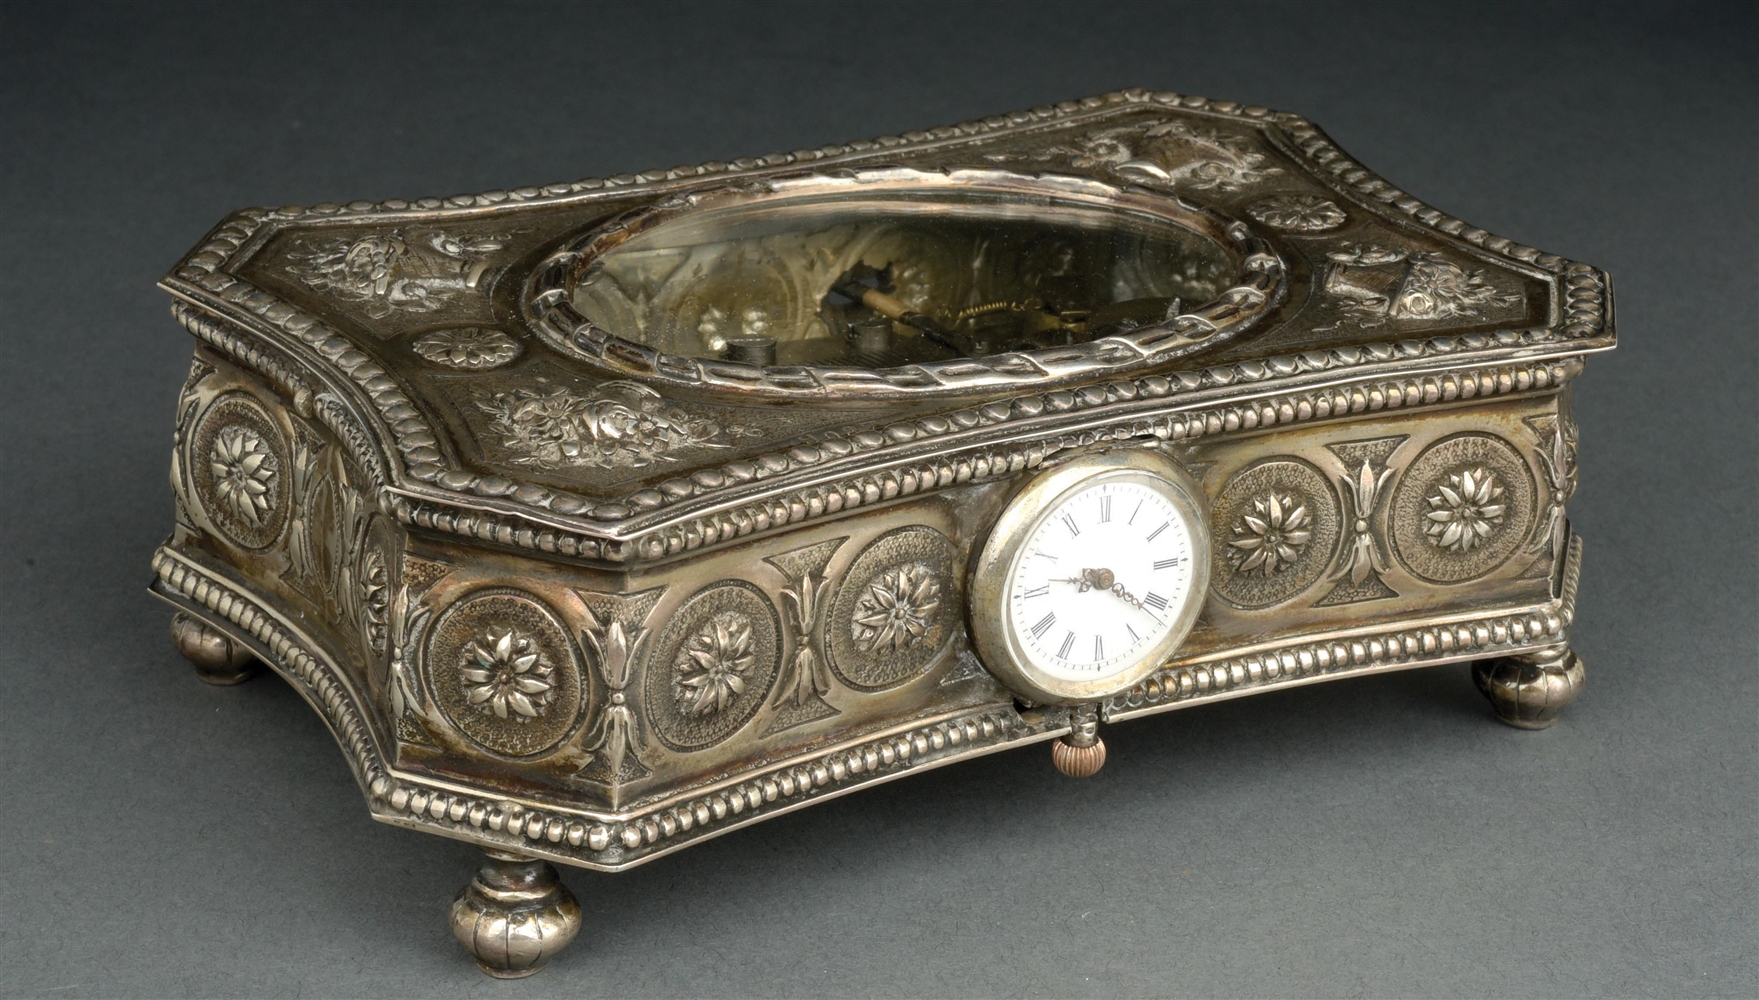 ELABORATE REPOUSSE MUSIC BOX WITH CLOCK.